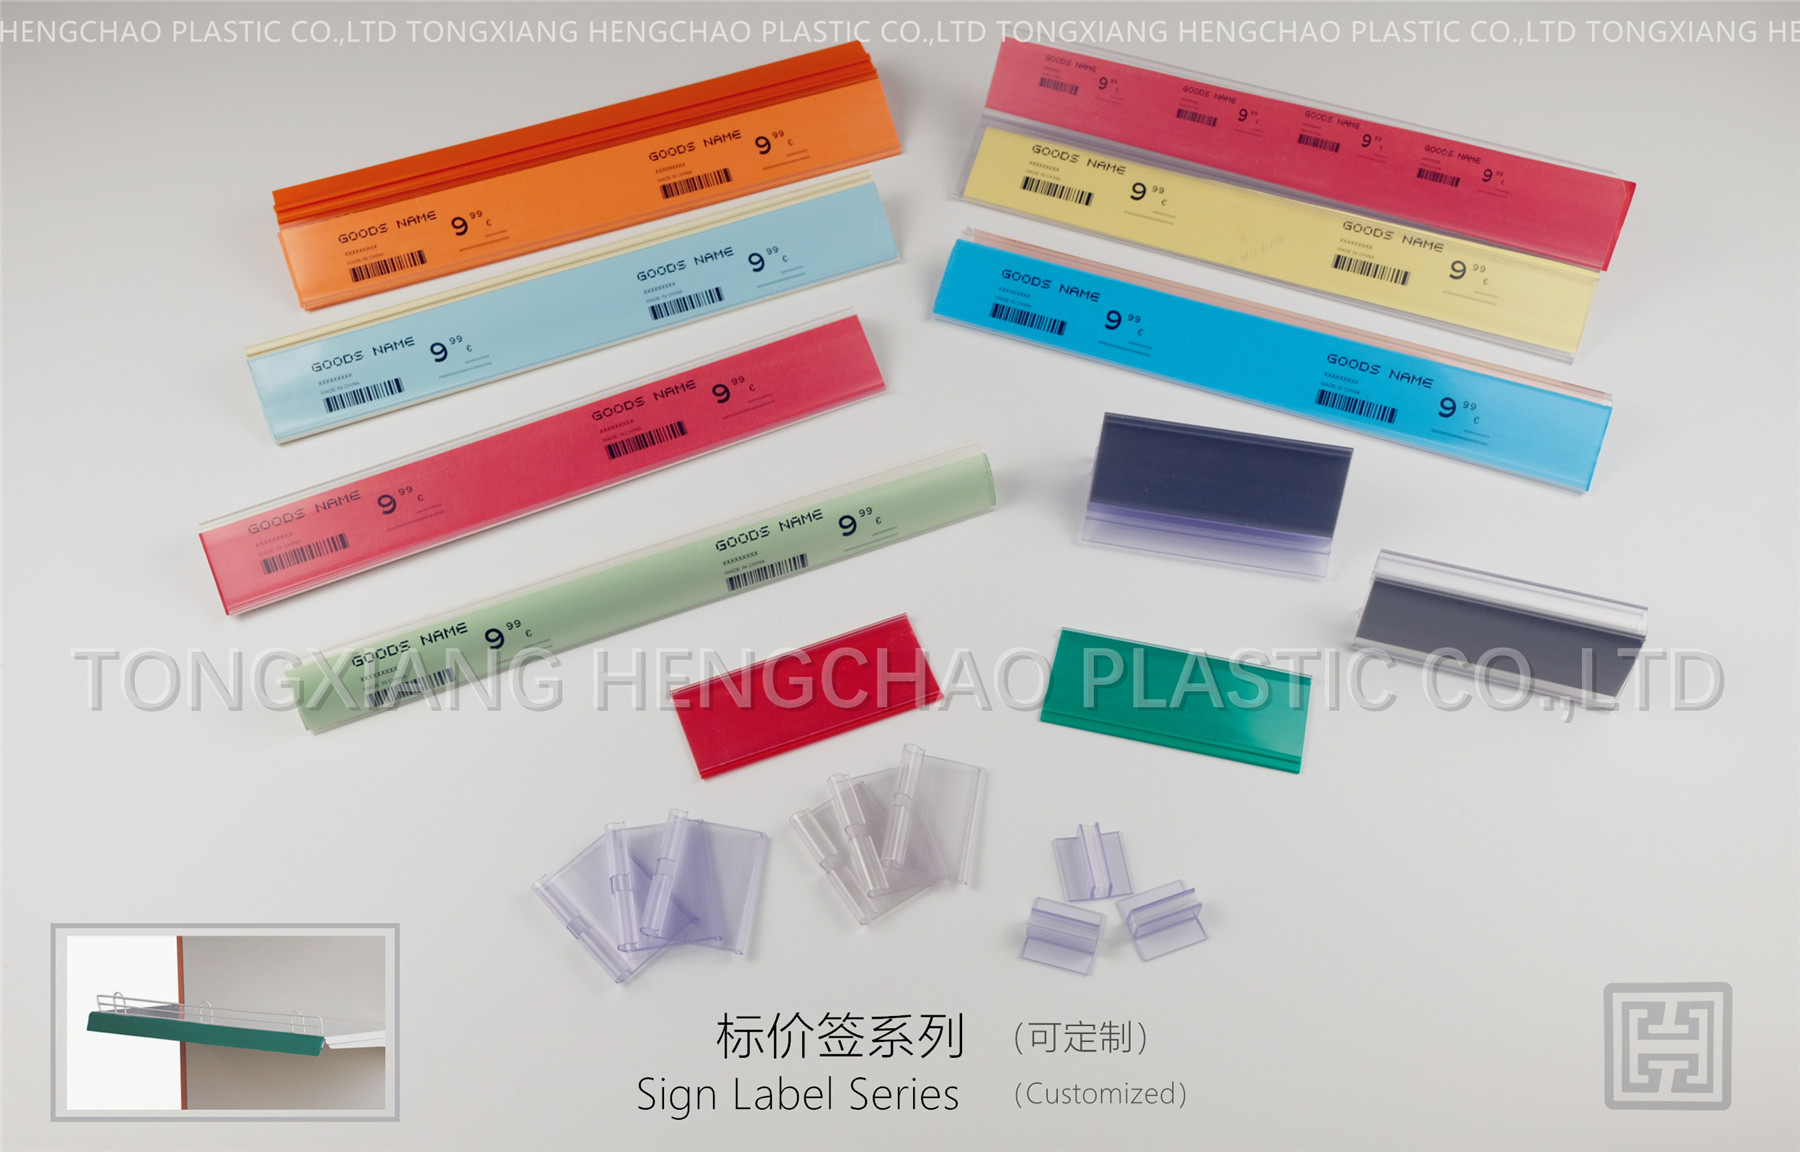  Moisture Proof PVC Extrusion Profiles , Green Level Plastic Extruded Products Manufactures